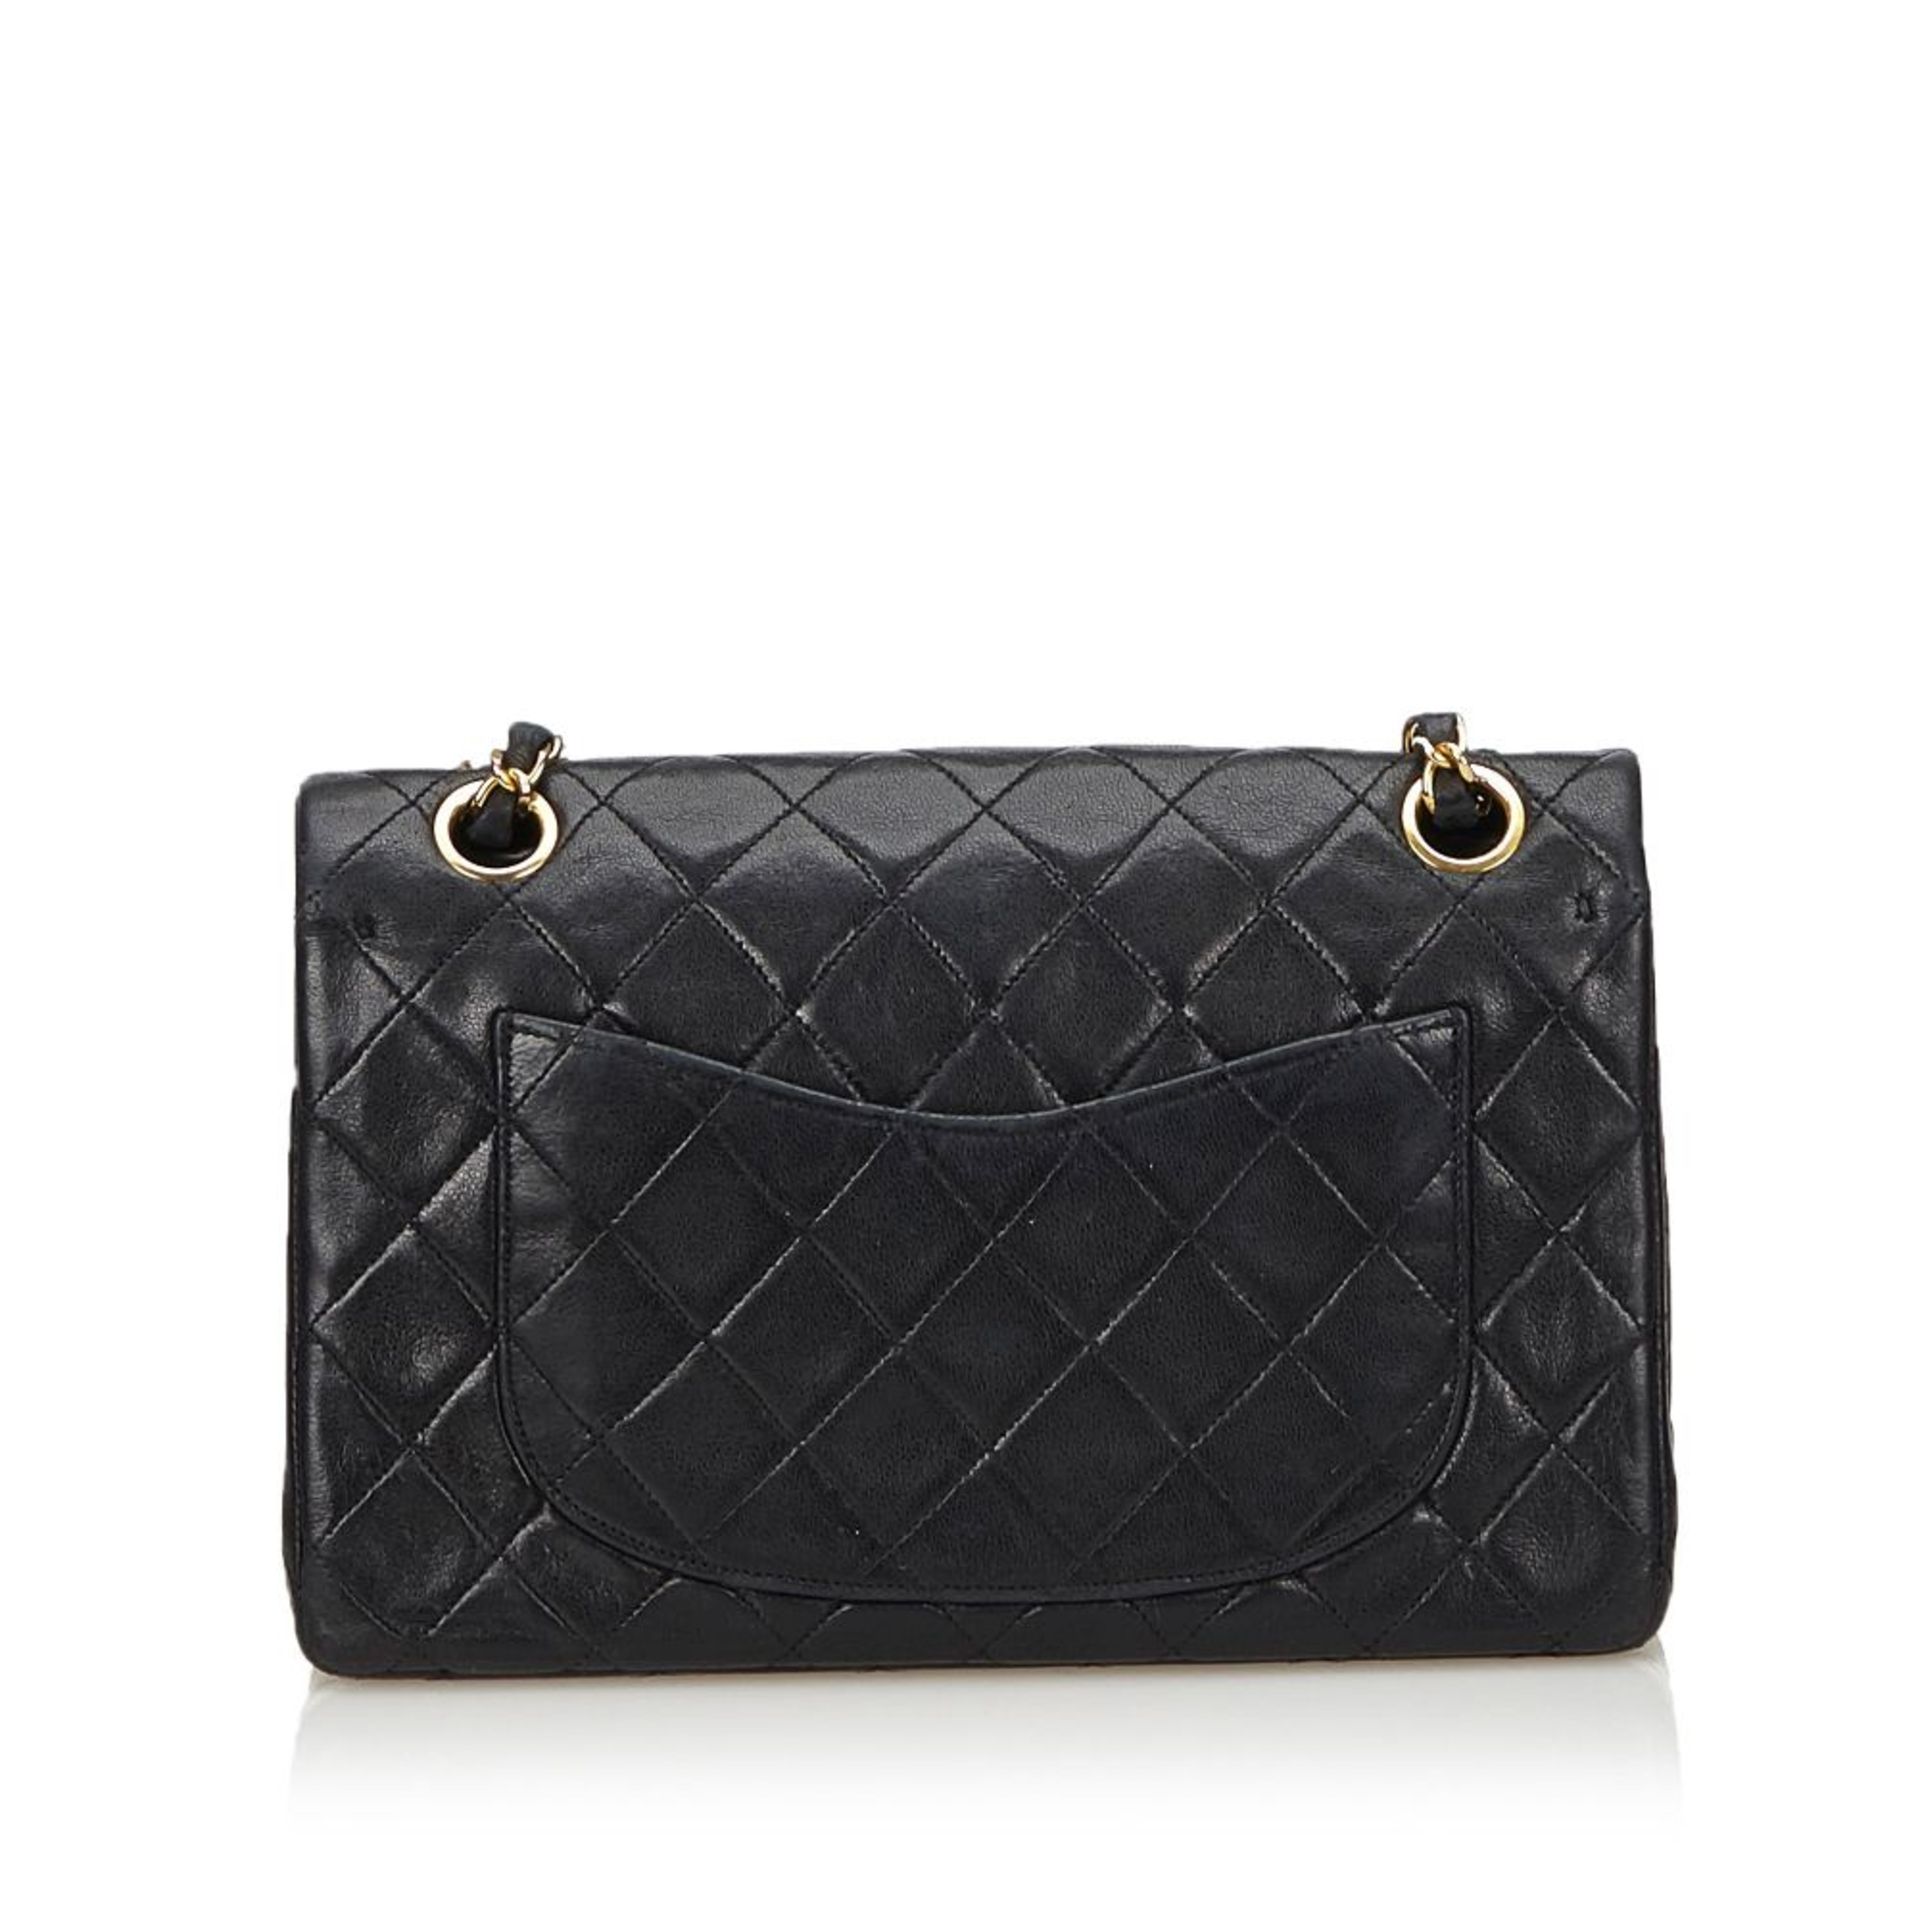 A Chanel classic small leather double flap shoulder bag,featuring a quilted leather body, gold- - Image 3 of 6